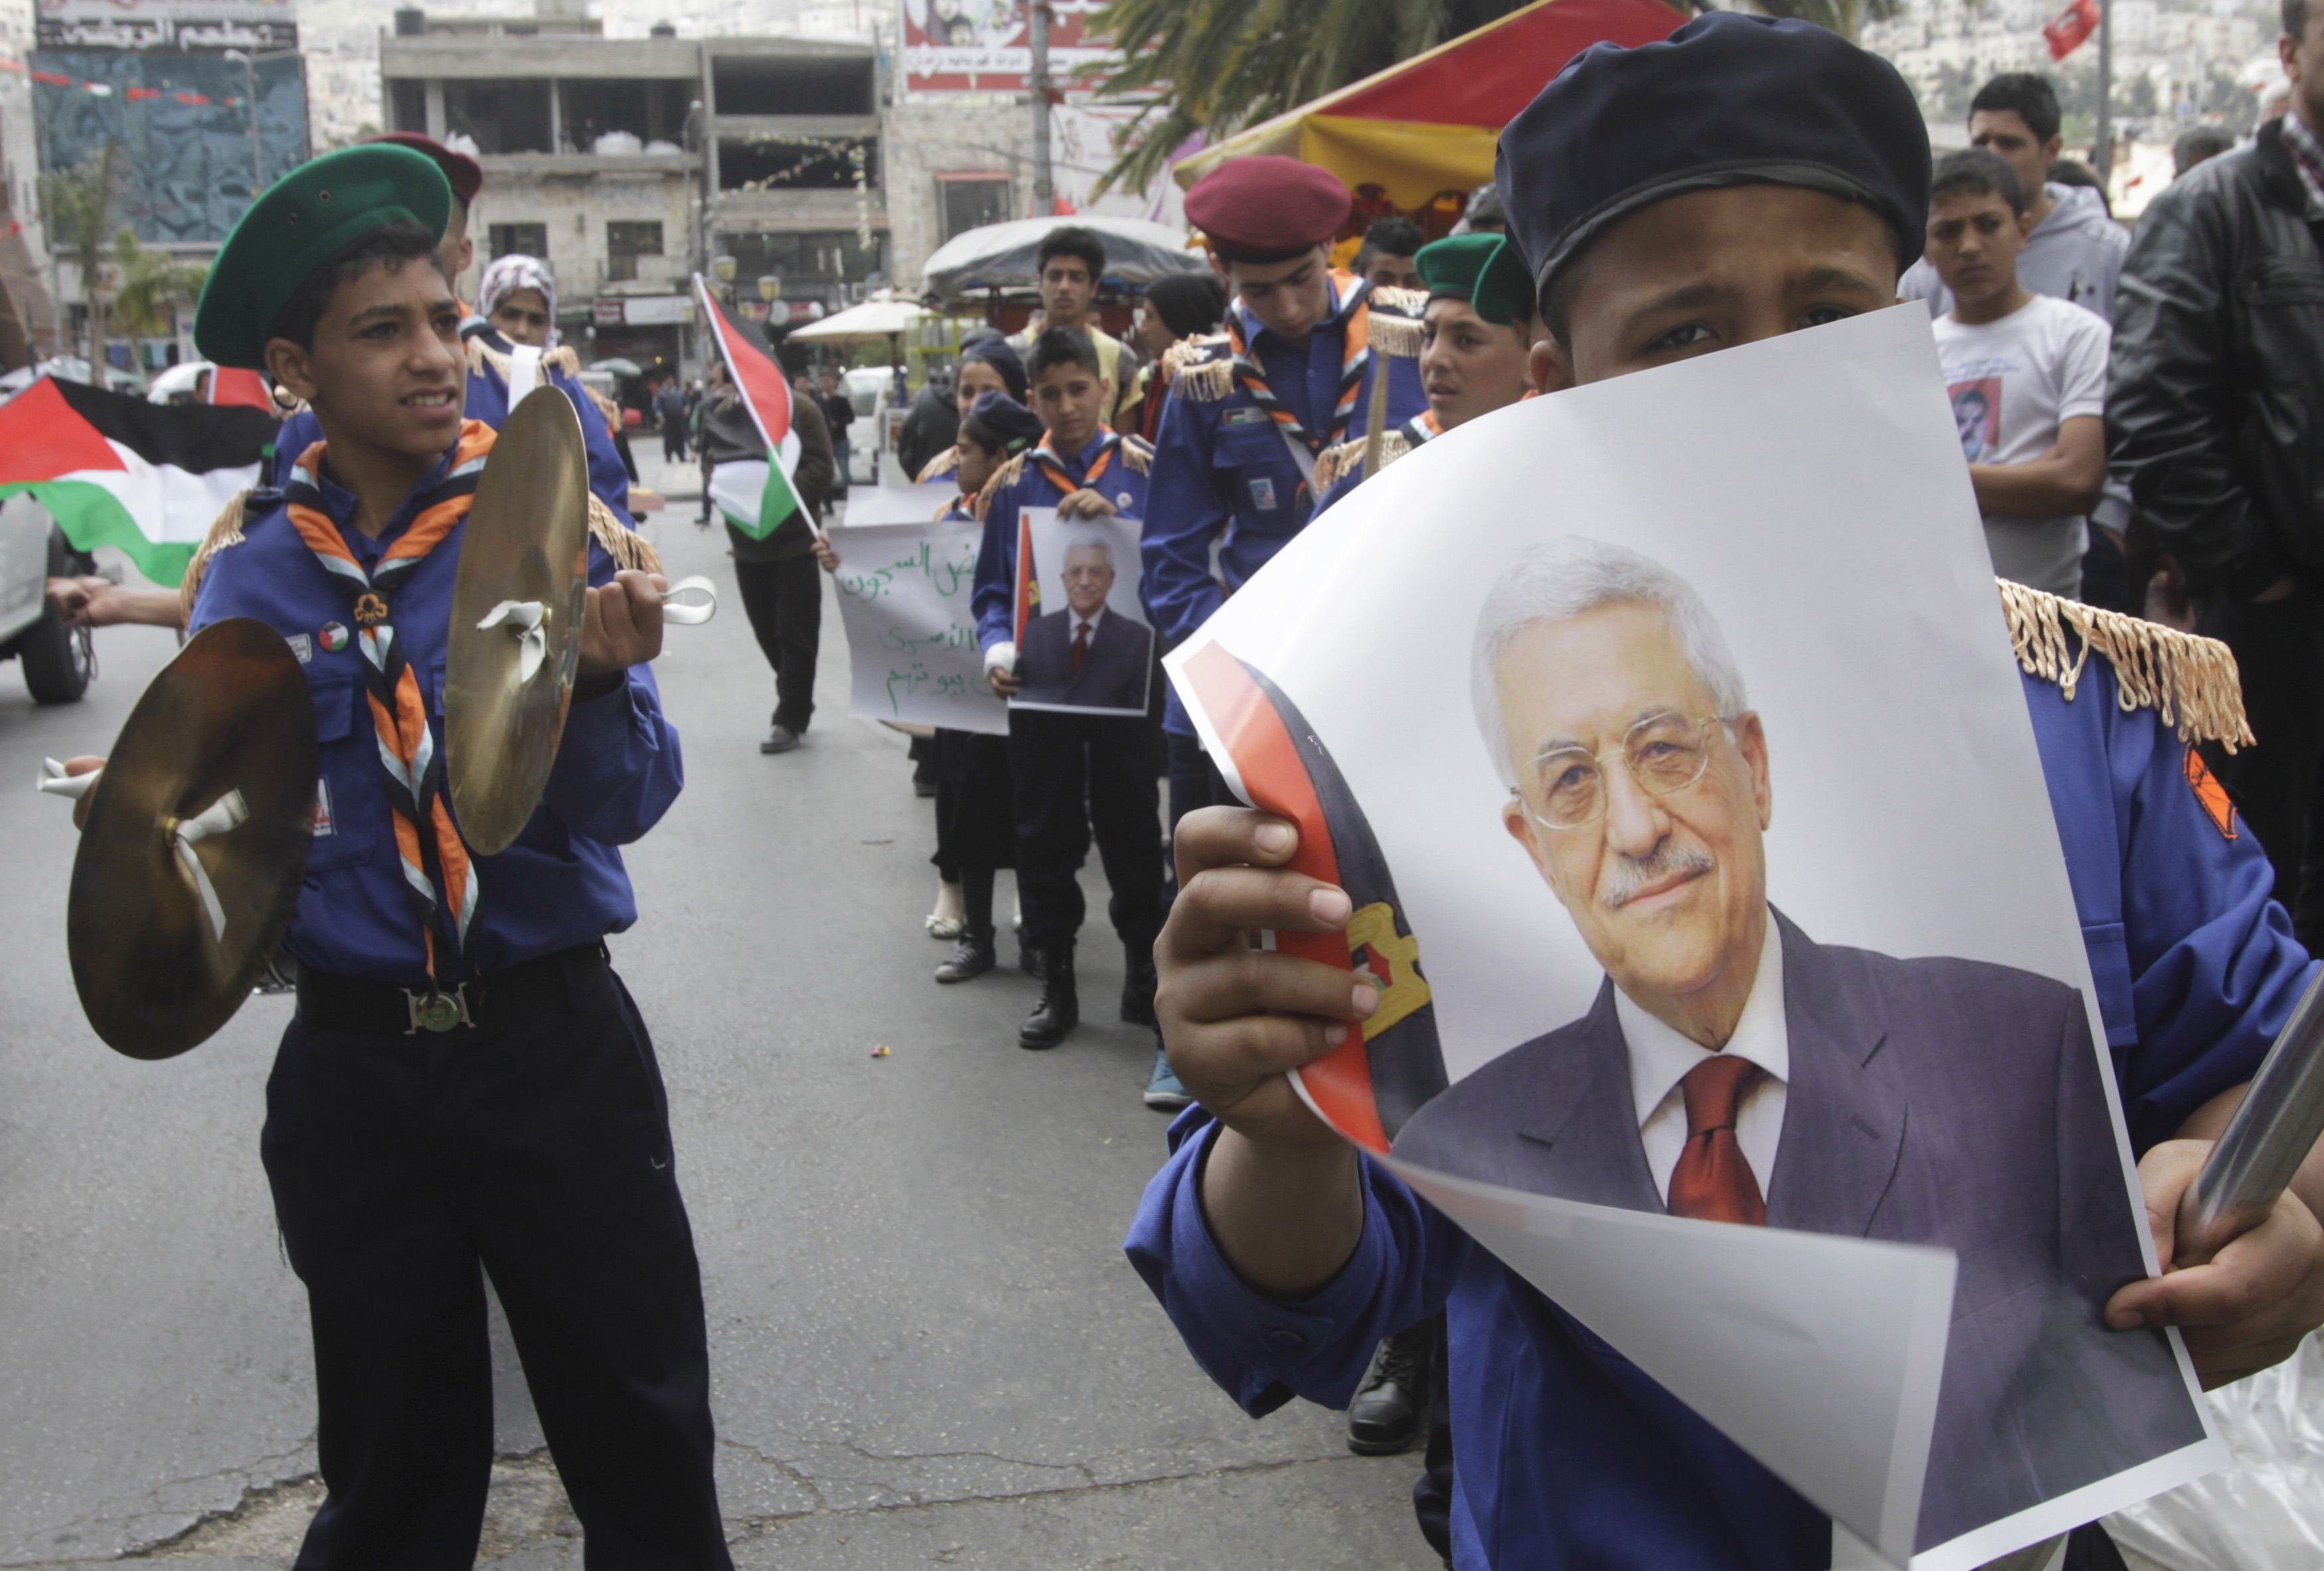 Scouts hold posters of Palestinian President Mahmoud Abbas during a Fatah rally in the West Bank city of Nablus on April 2, 2014 (Abed Omar Qusini—Reuters)